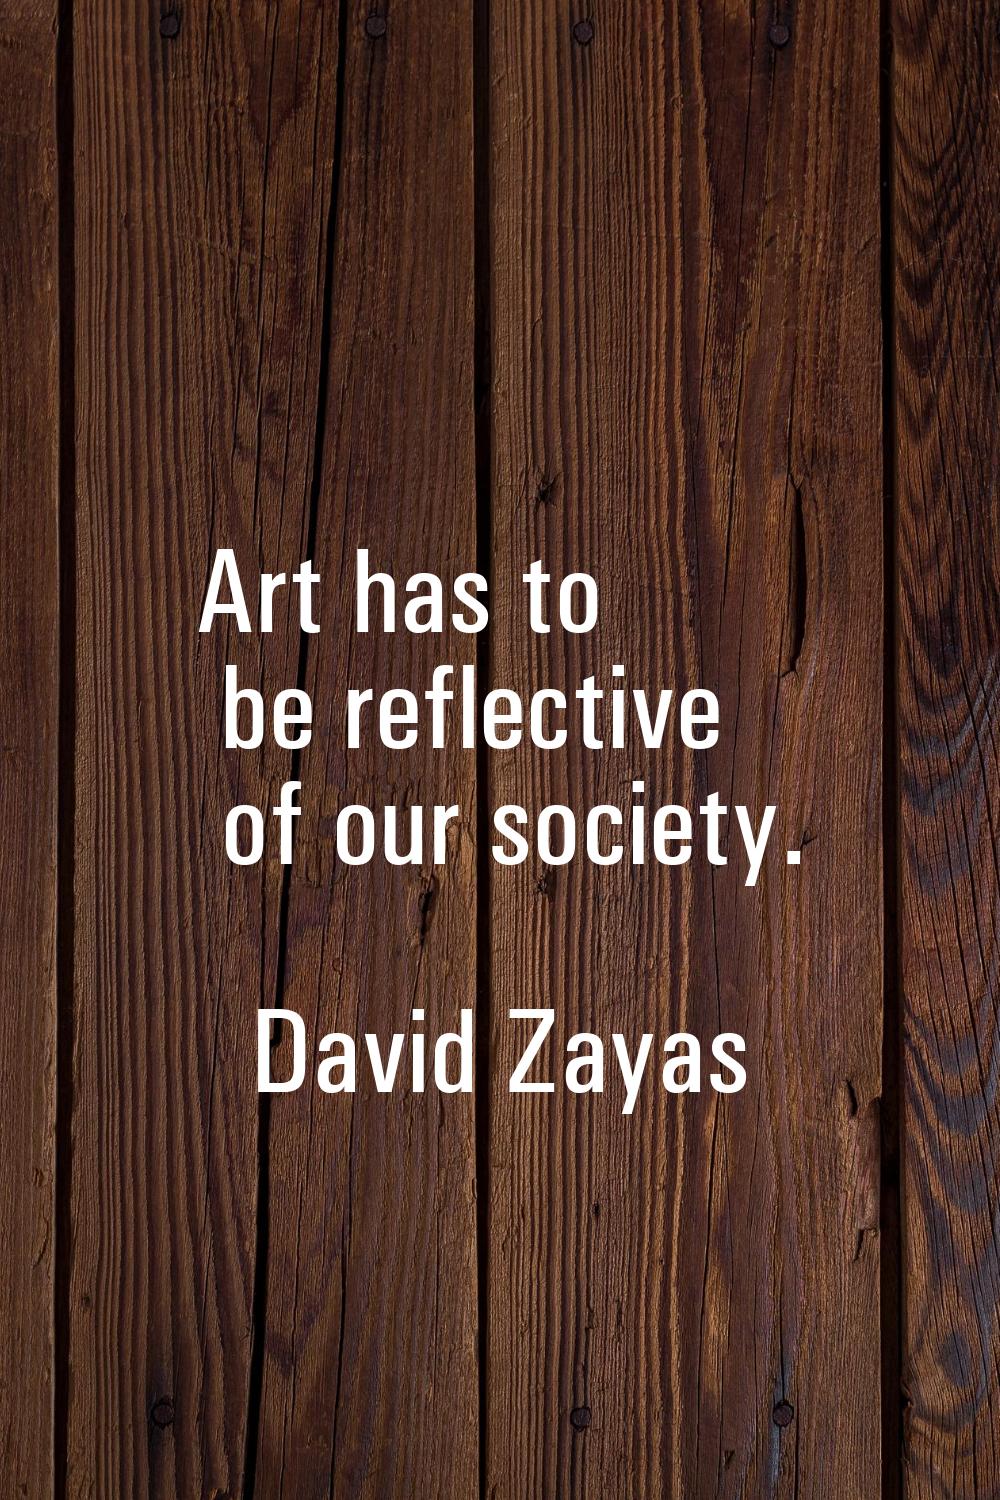 Art has to be reflective of our society.